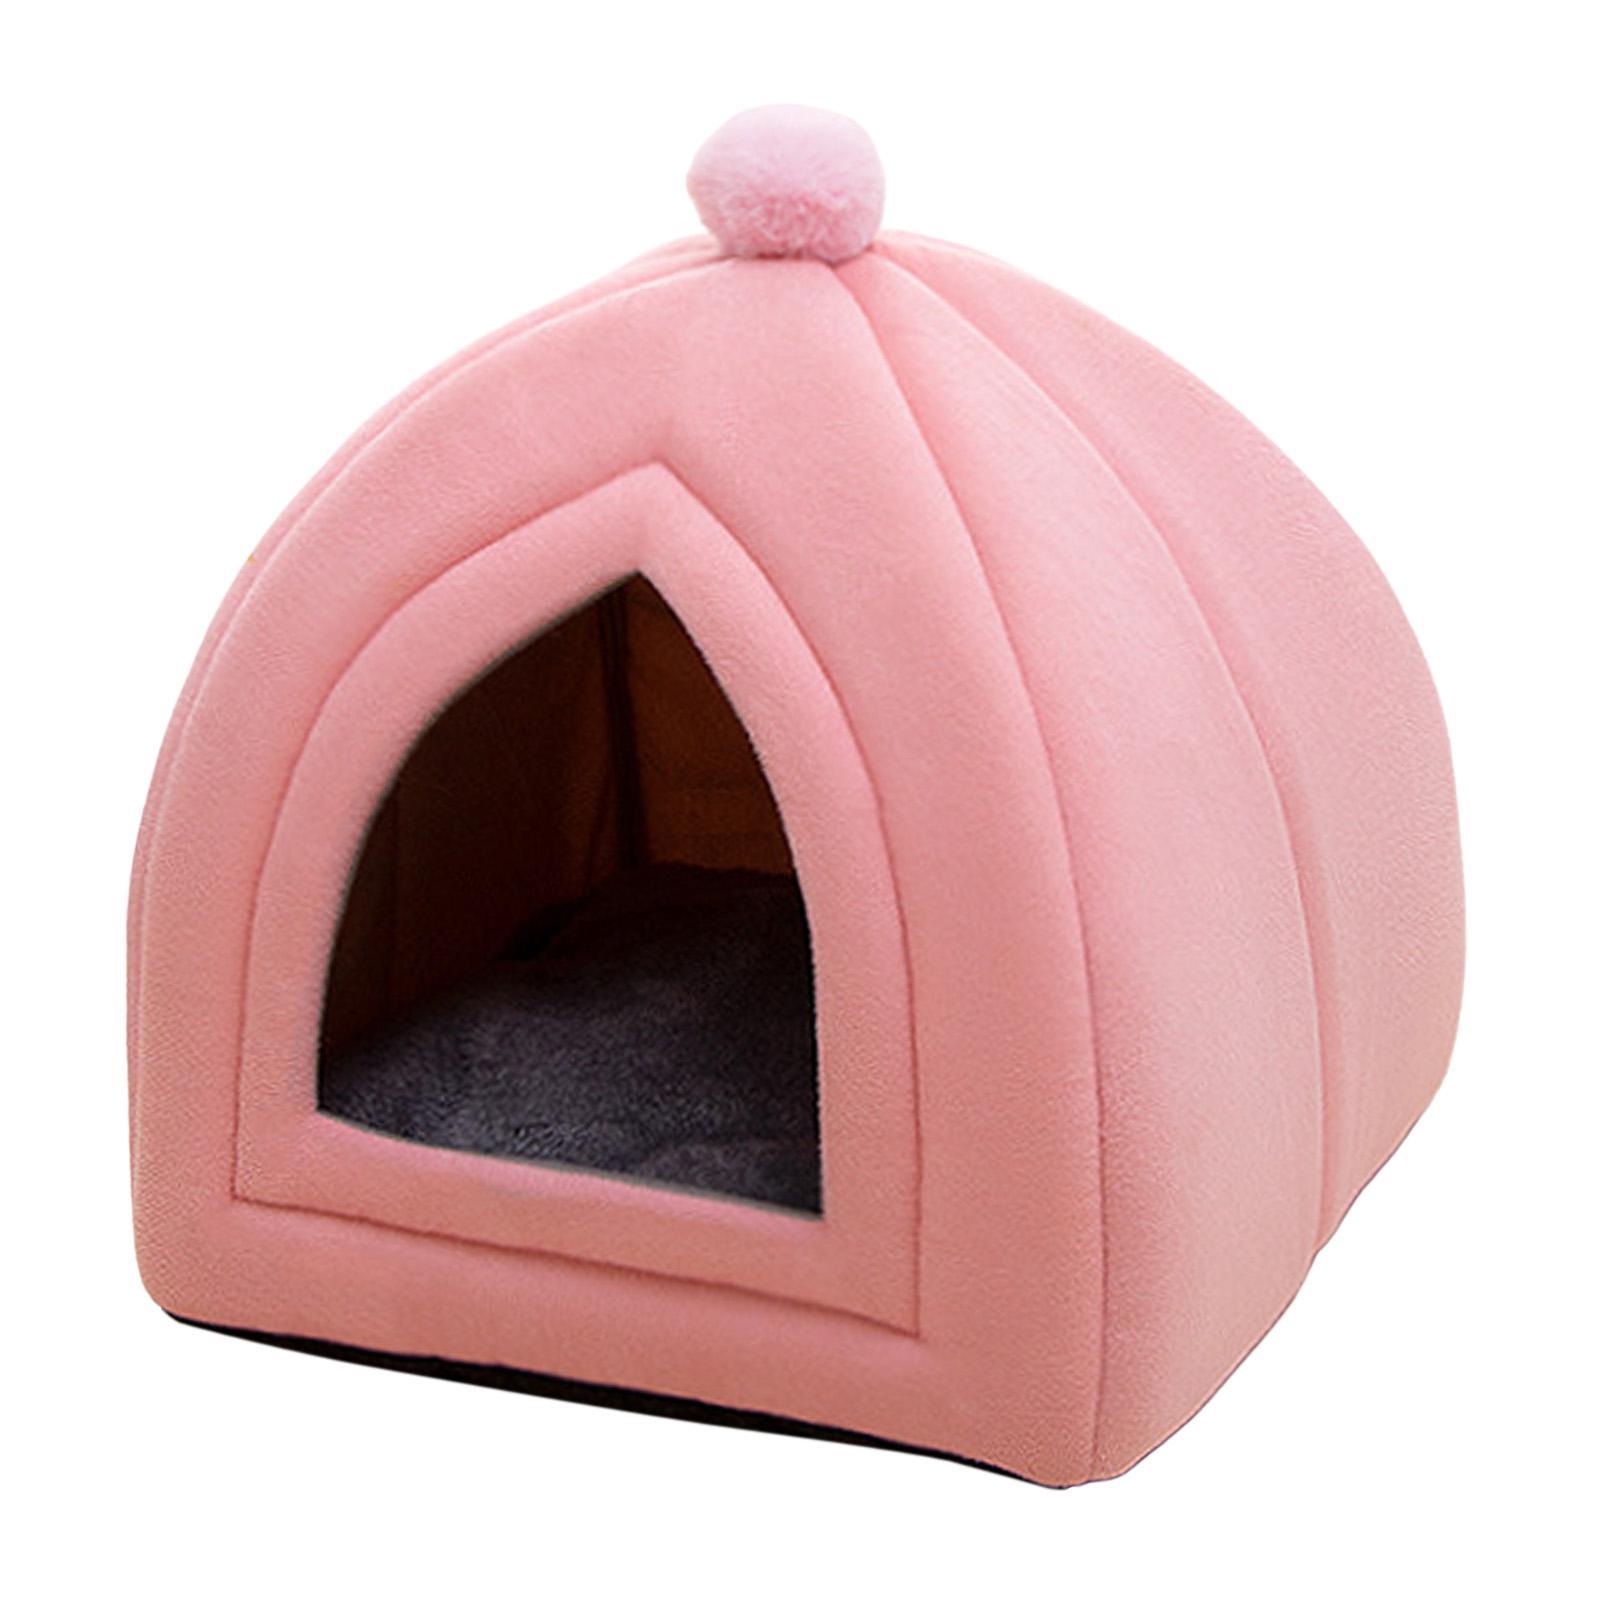 Cat Bed Pink M